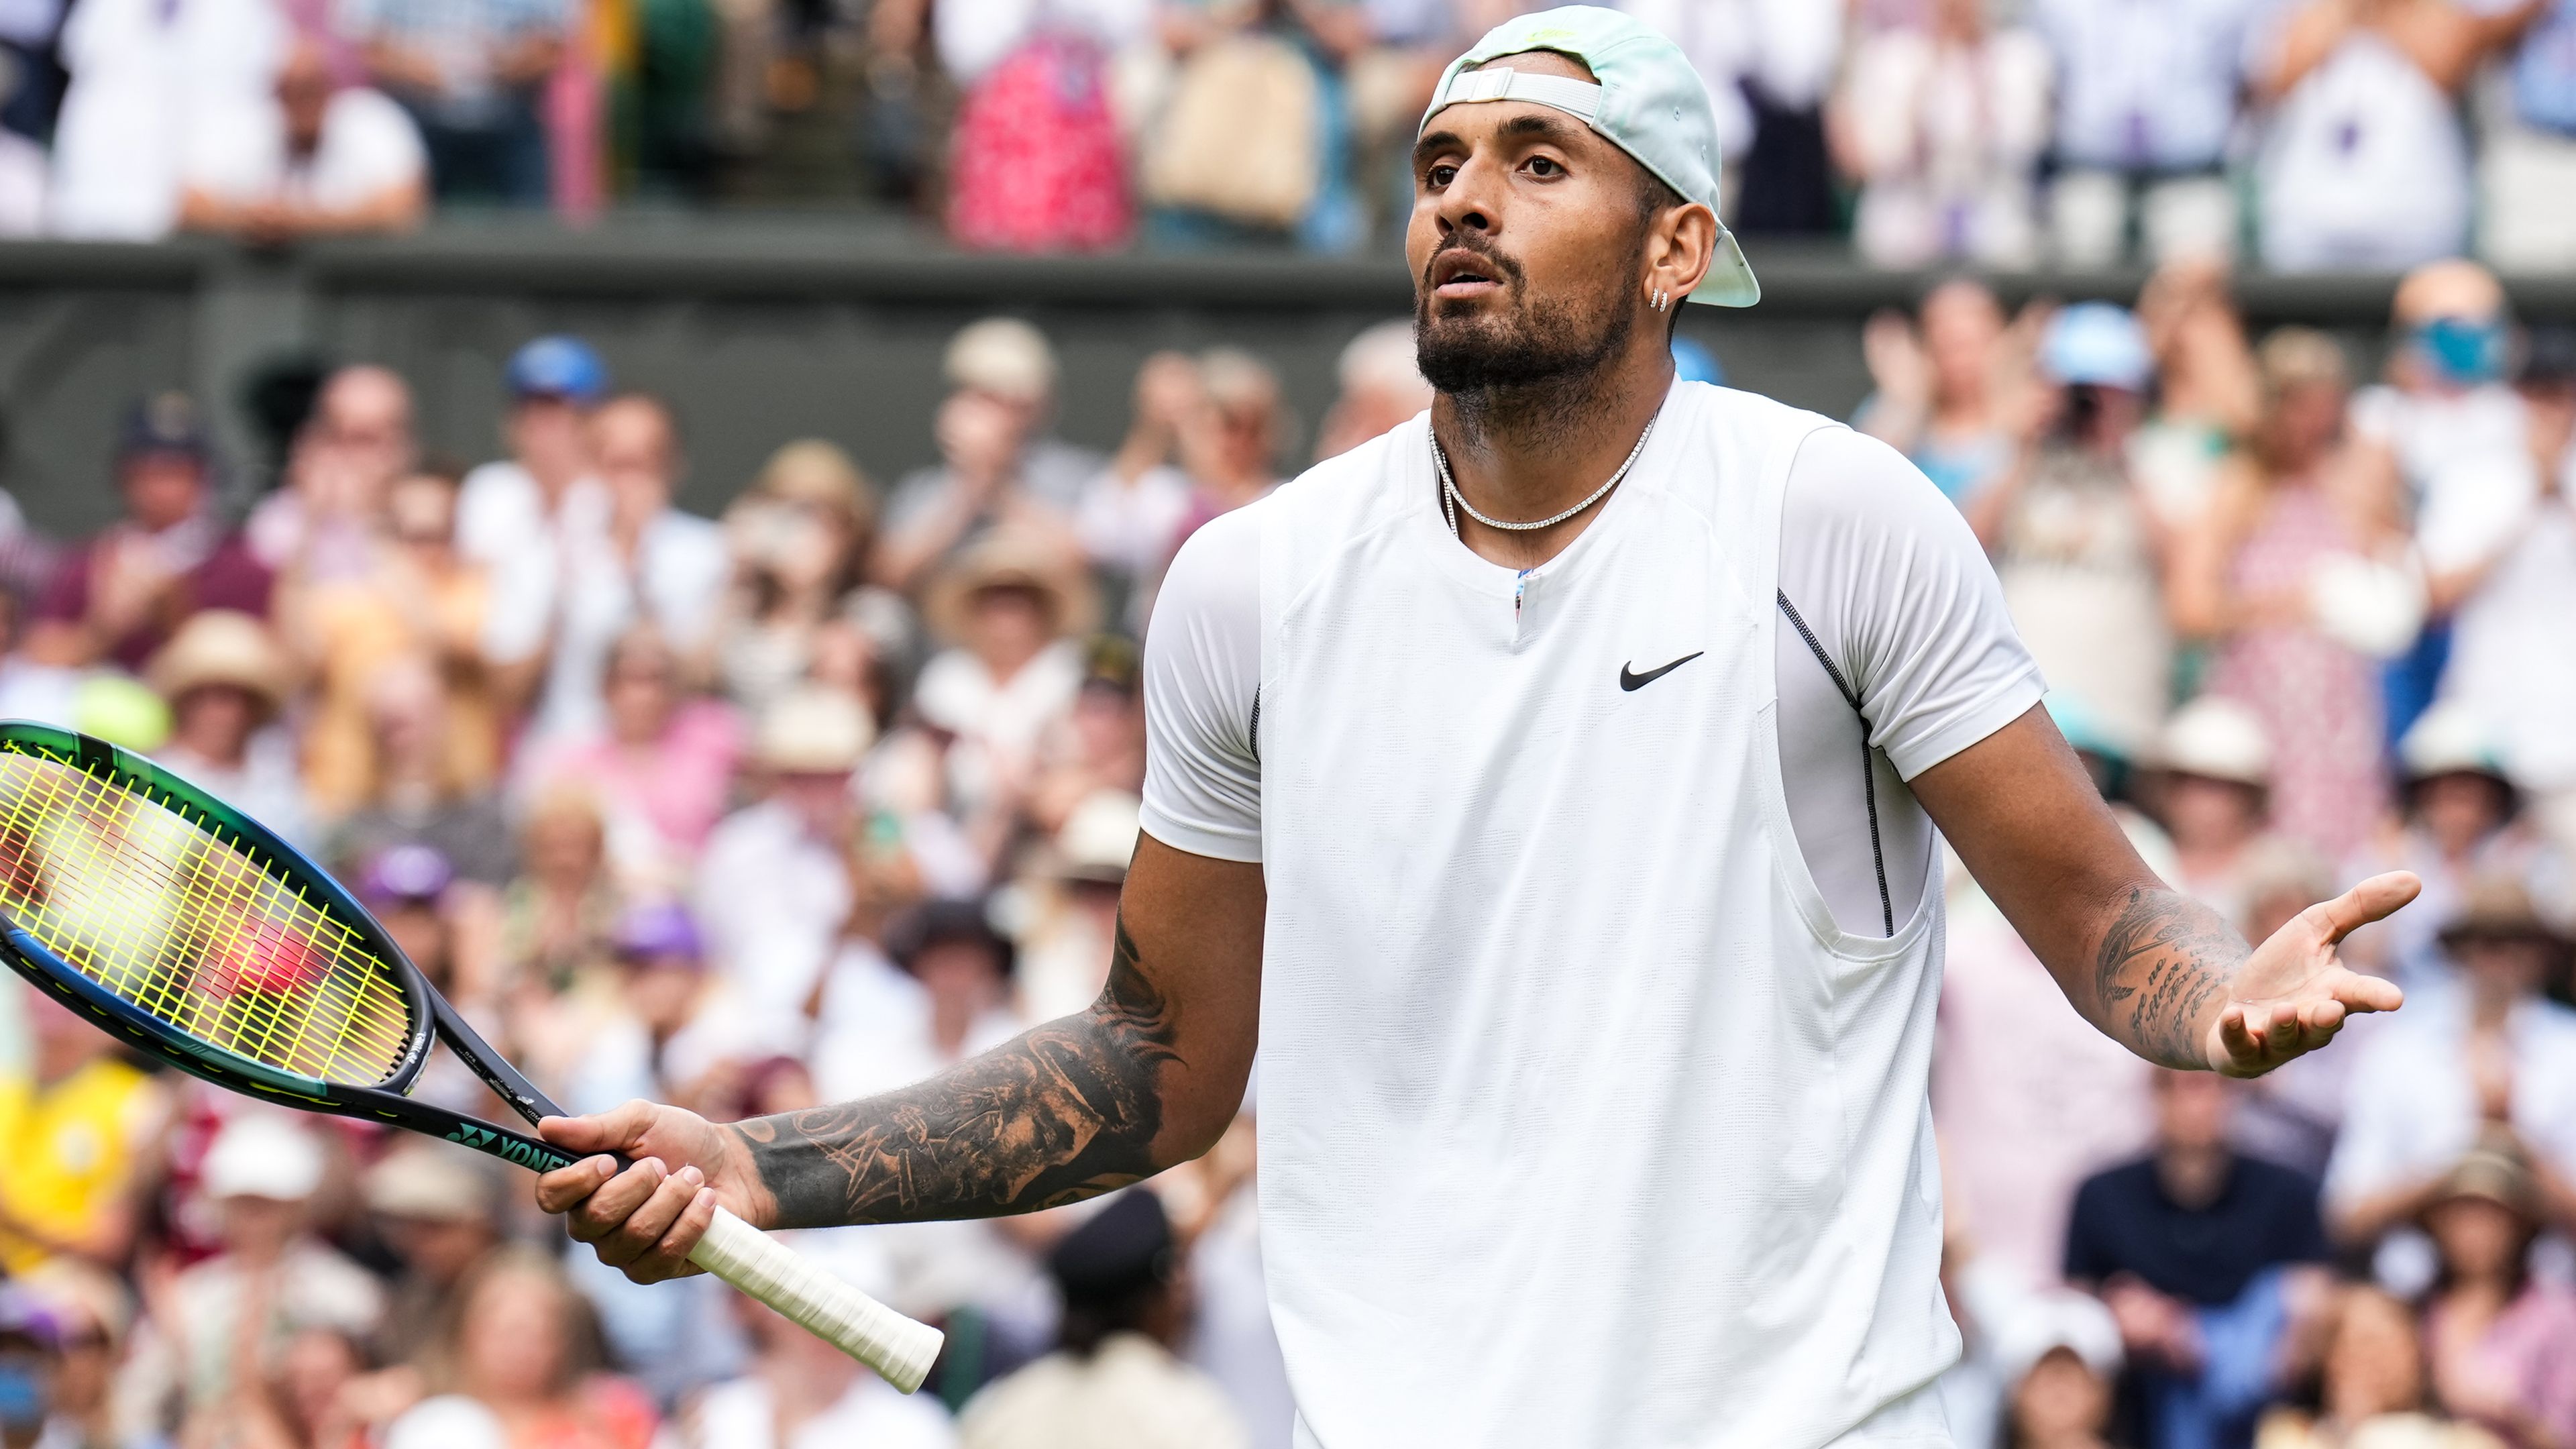 EXCLUSIVE: Tennis great says Nick Kyrgios tanking tactic 'worked a treat' in Wimbledon win